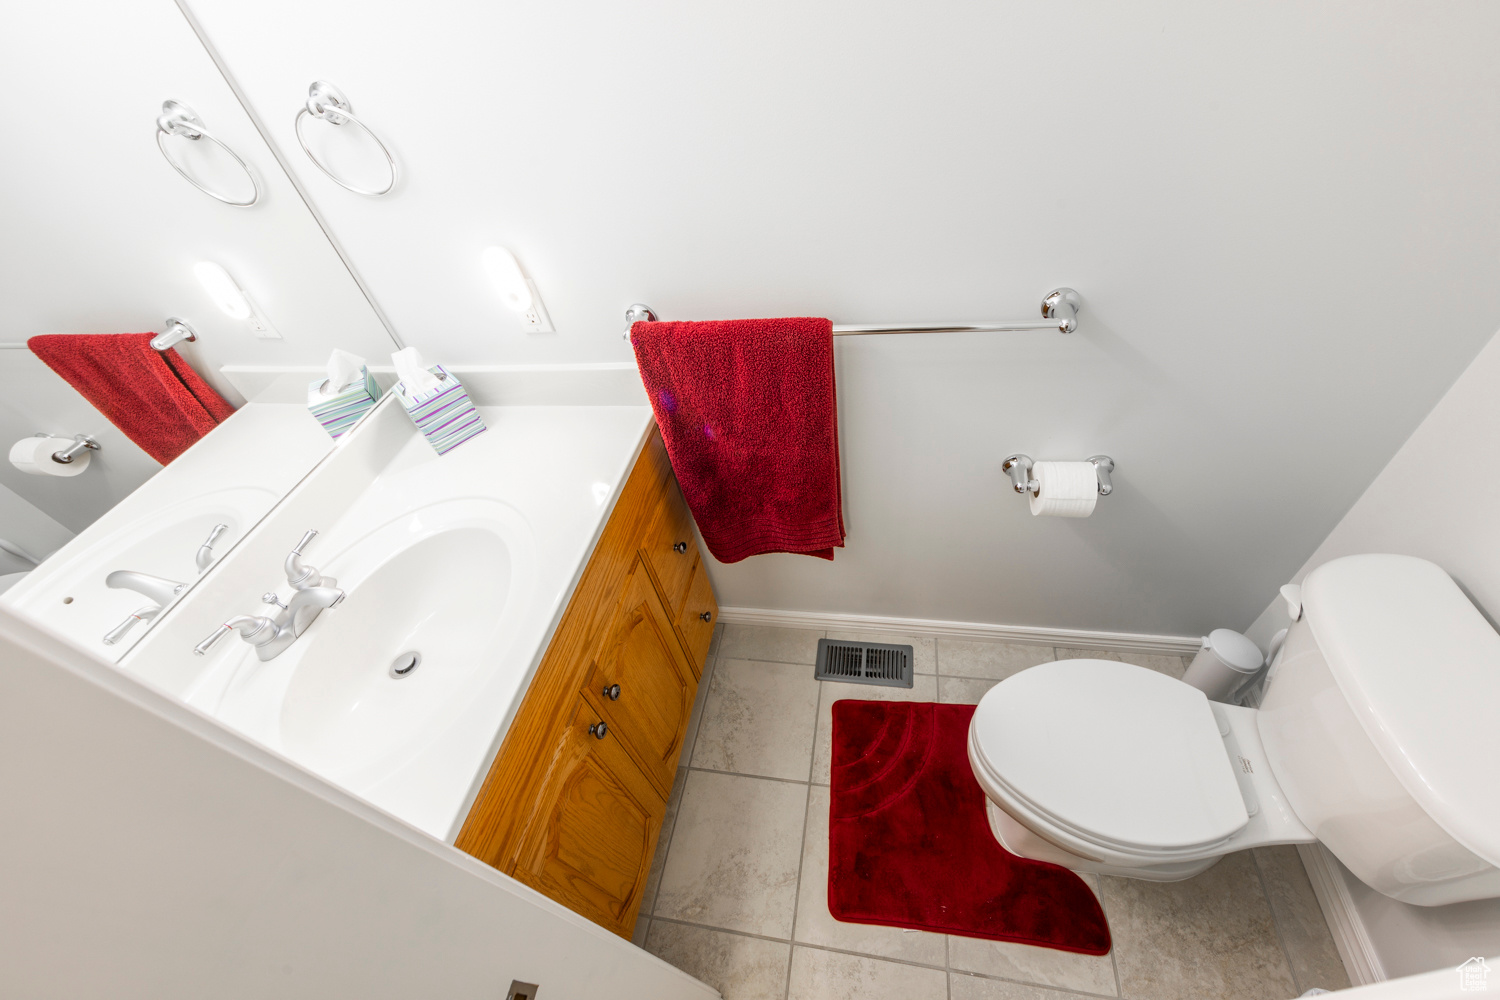 1/2 Bathroom  of of kitchen featuring vanity with extensive cabinet space, tile floors, and toilet